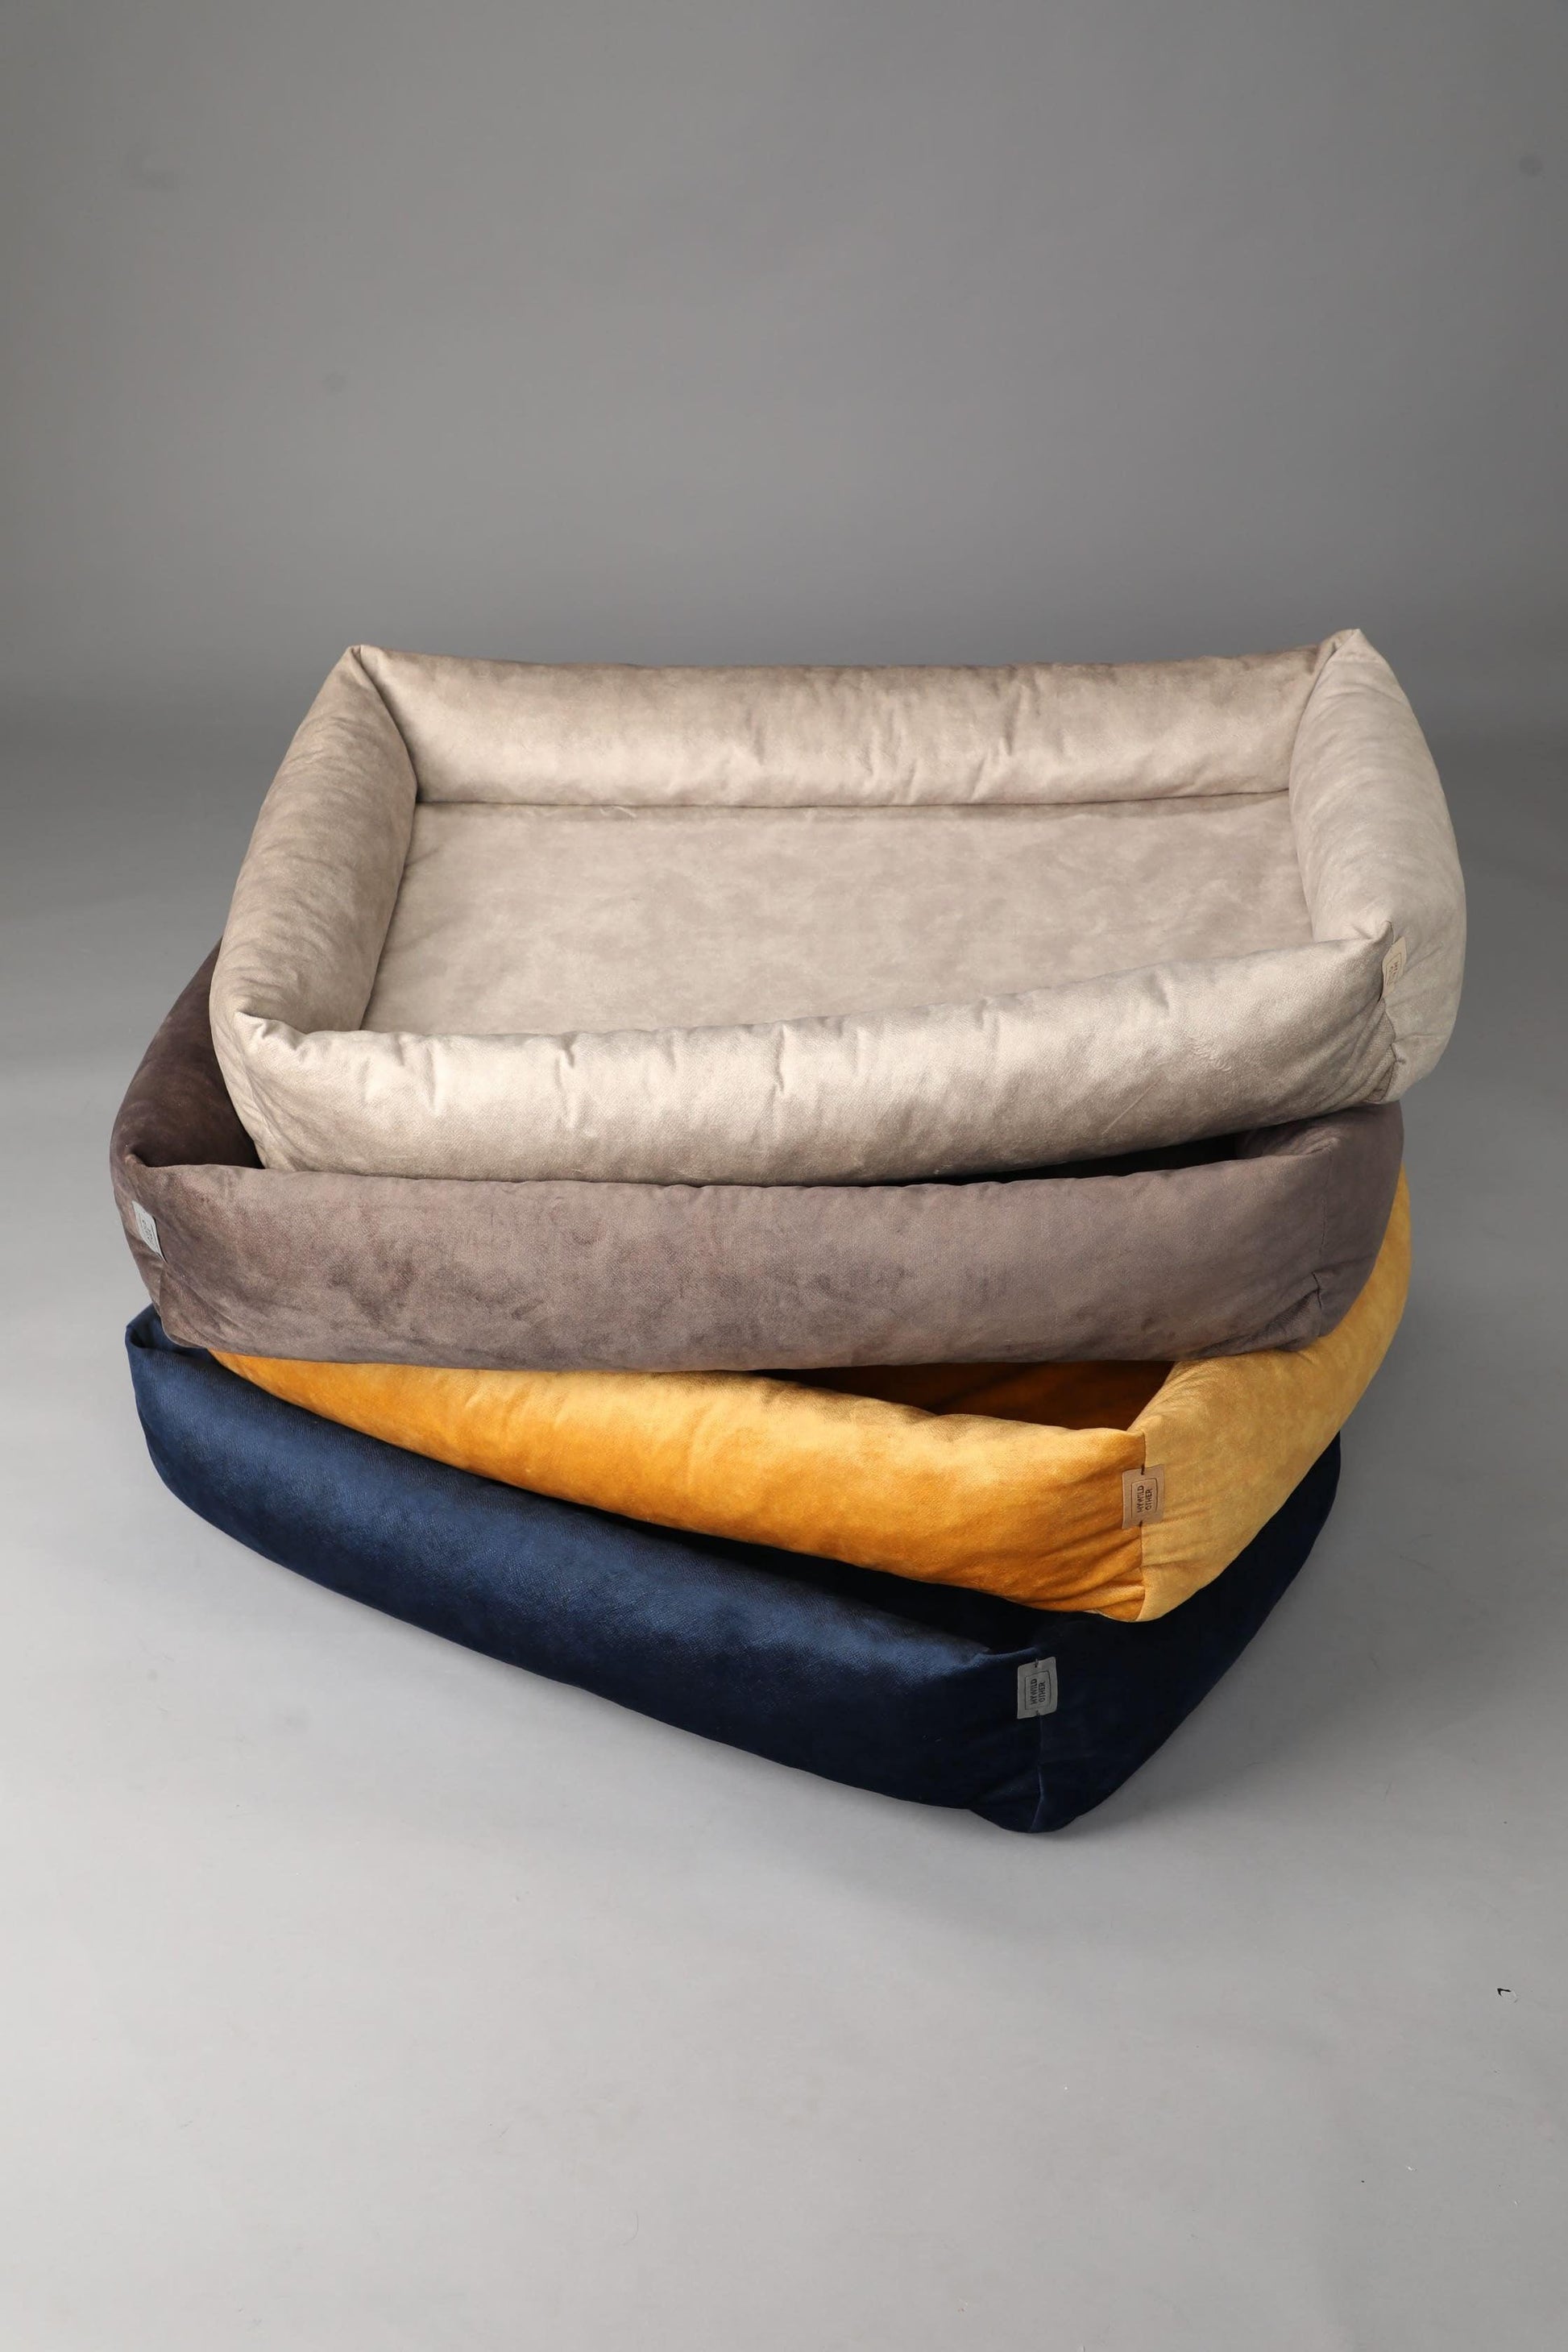 2-sided classic dog bed. AMBER YELLOW - European handmade dog accessories by My Wild Other